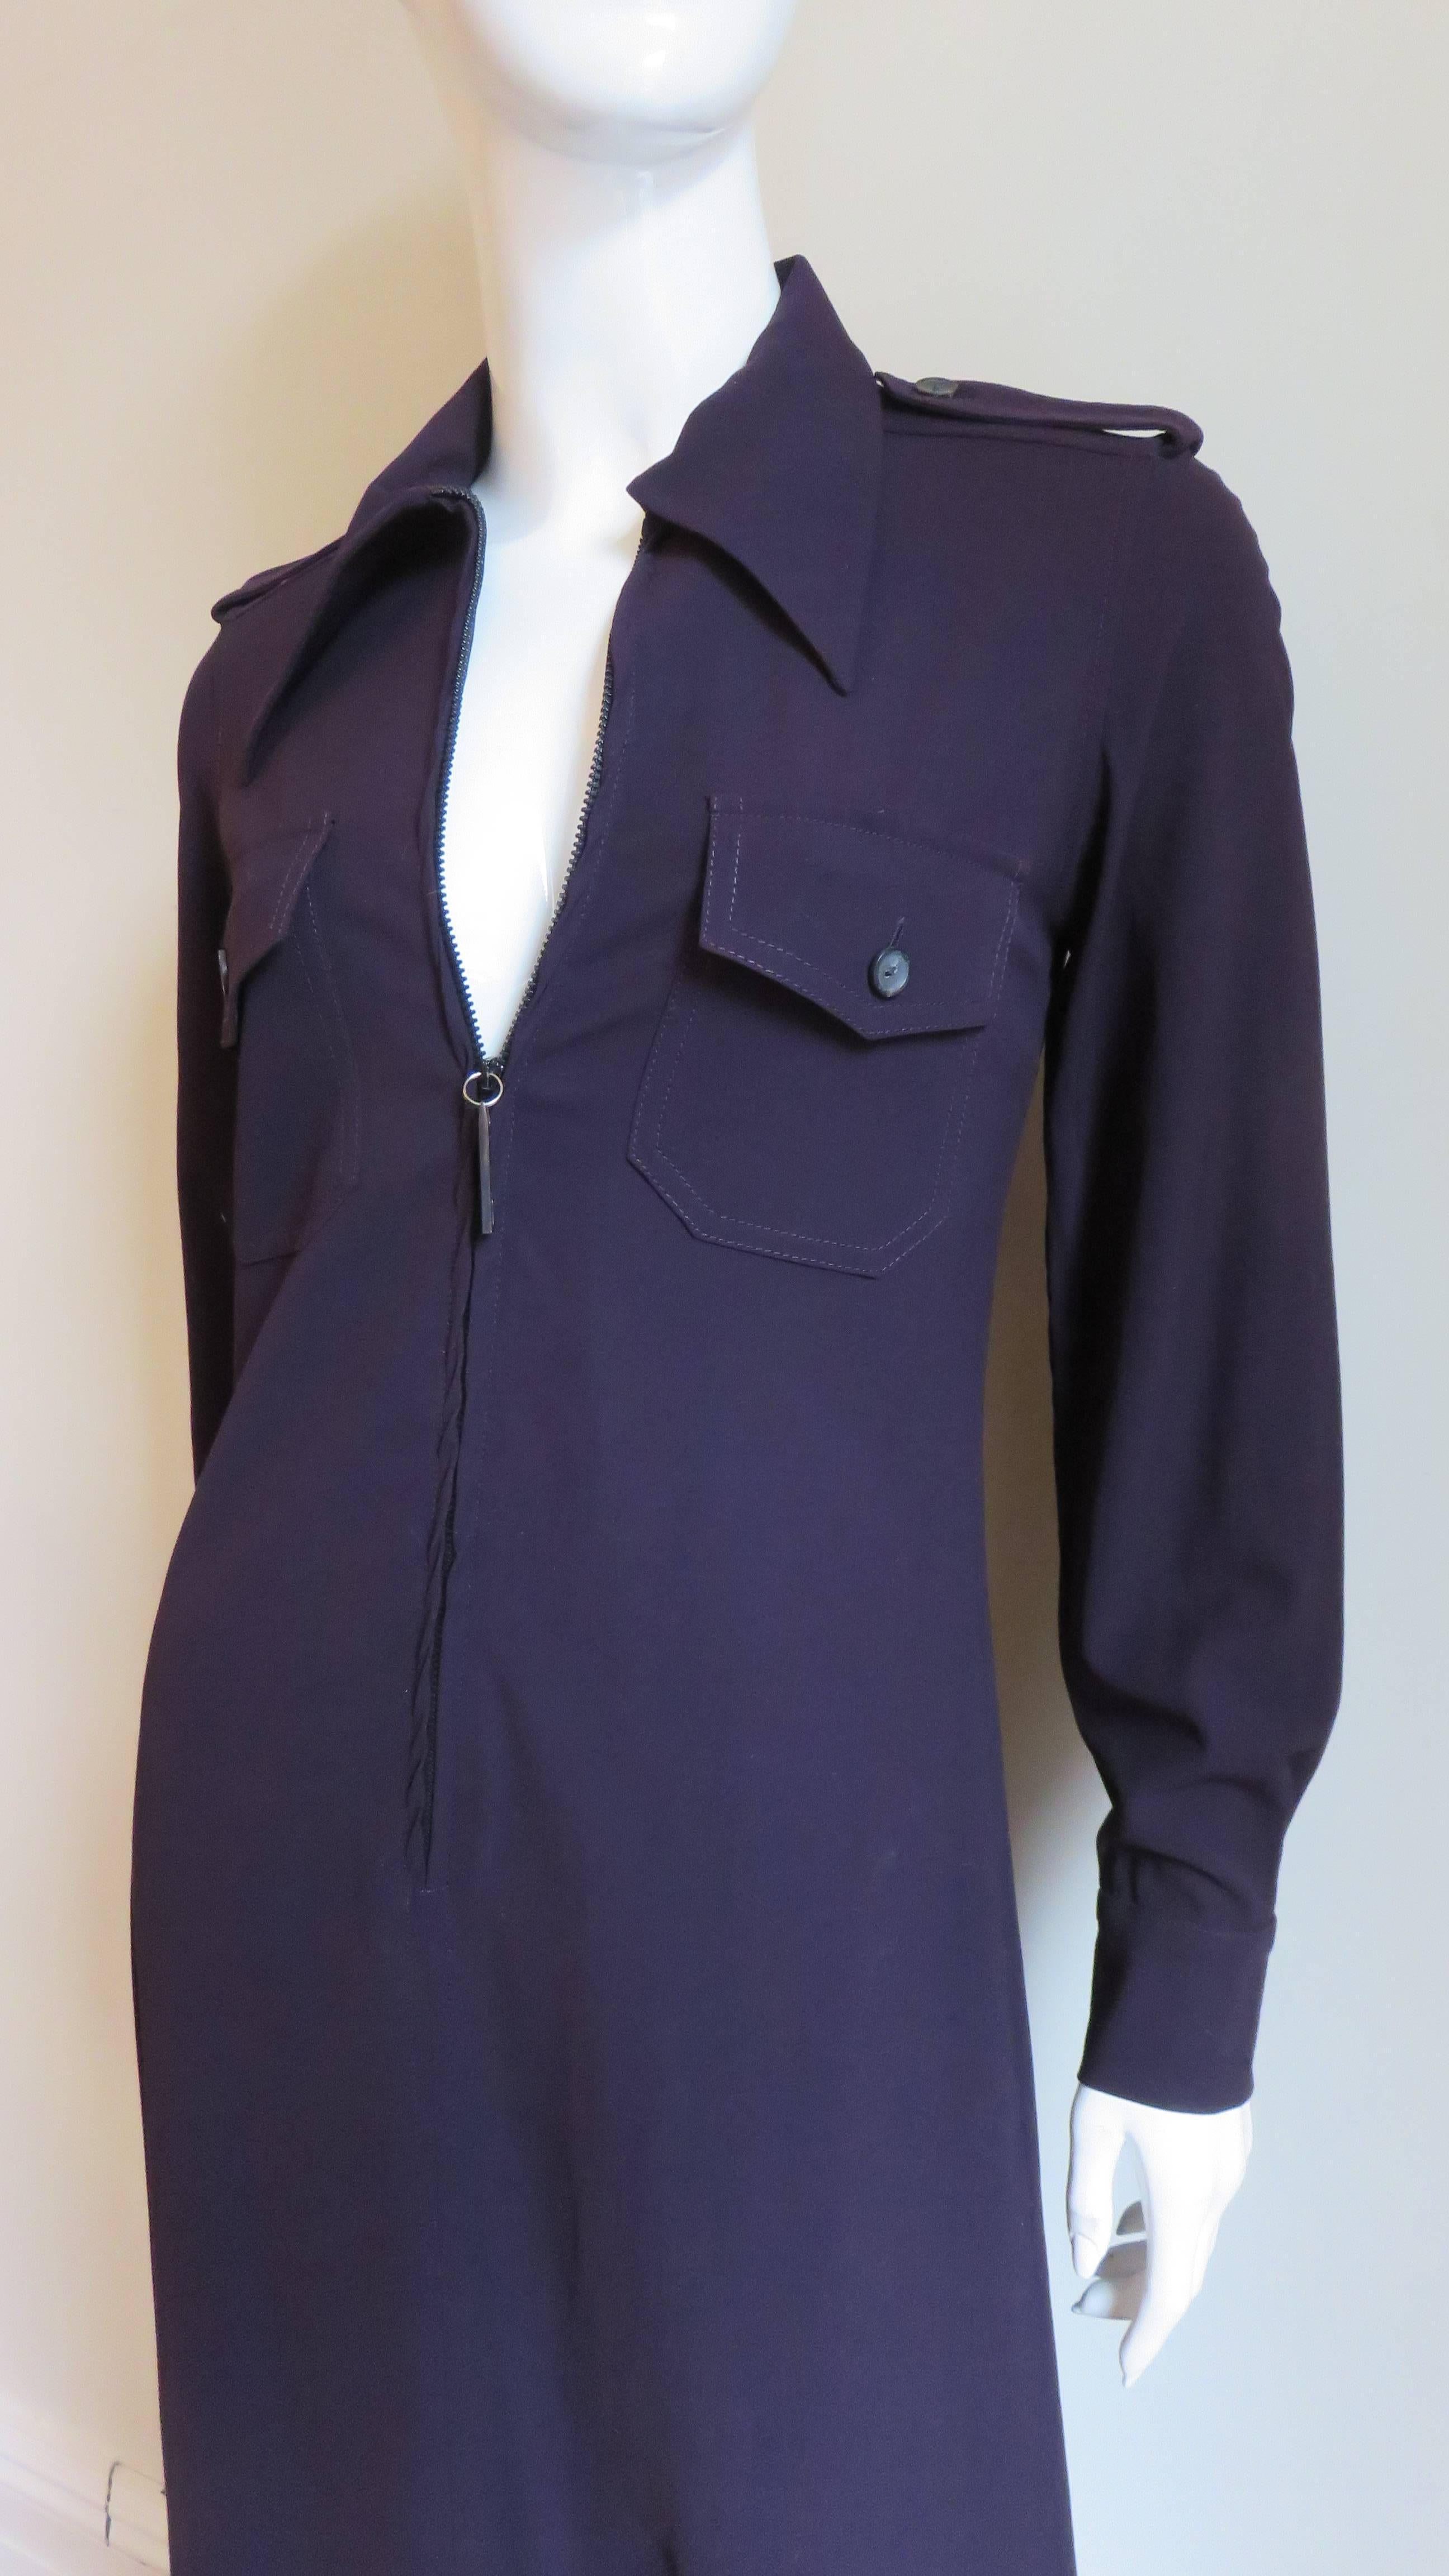 A fabulous eggplant purple stretch wool shirtwaist dress from Gucci. It has a shirt collar, 2 chest button flap pockets, button cuffs, epaulets along each shoulder, a back yoke and front zip with a metal G pull. The dress forms a subtle A line